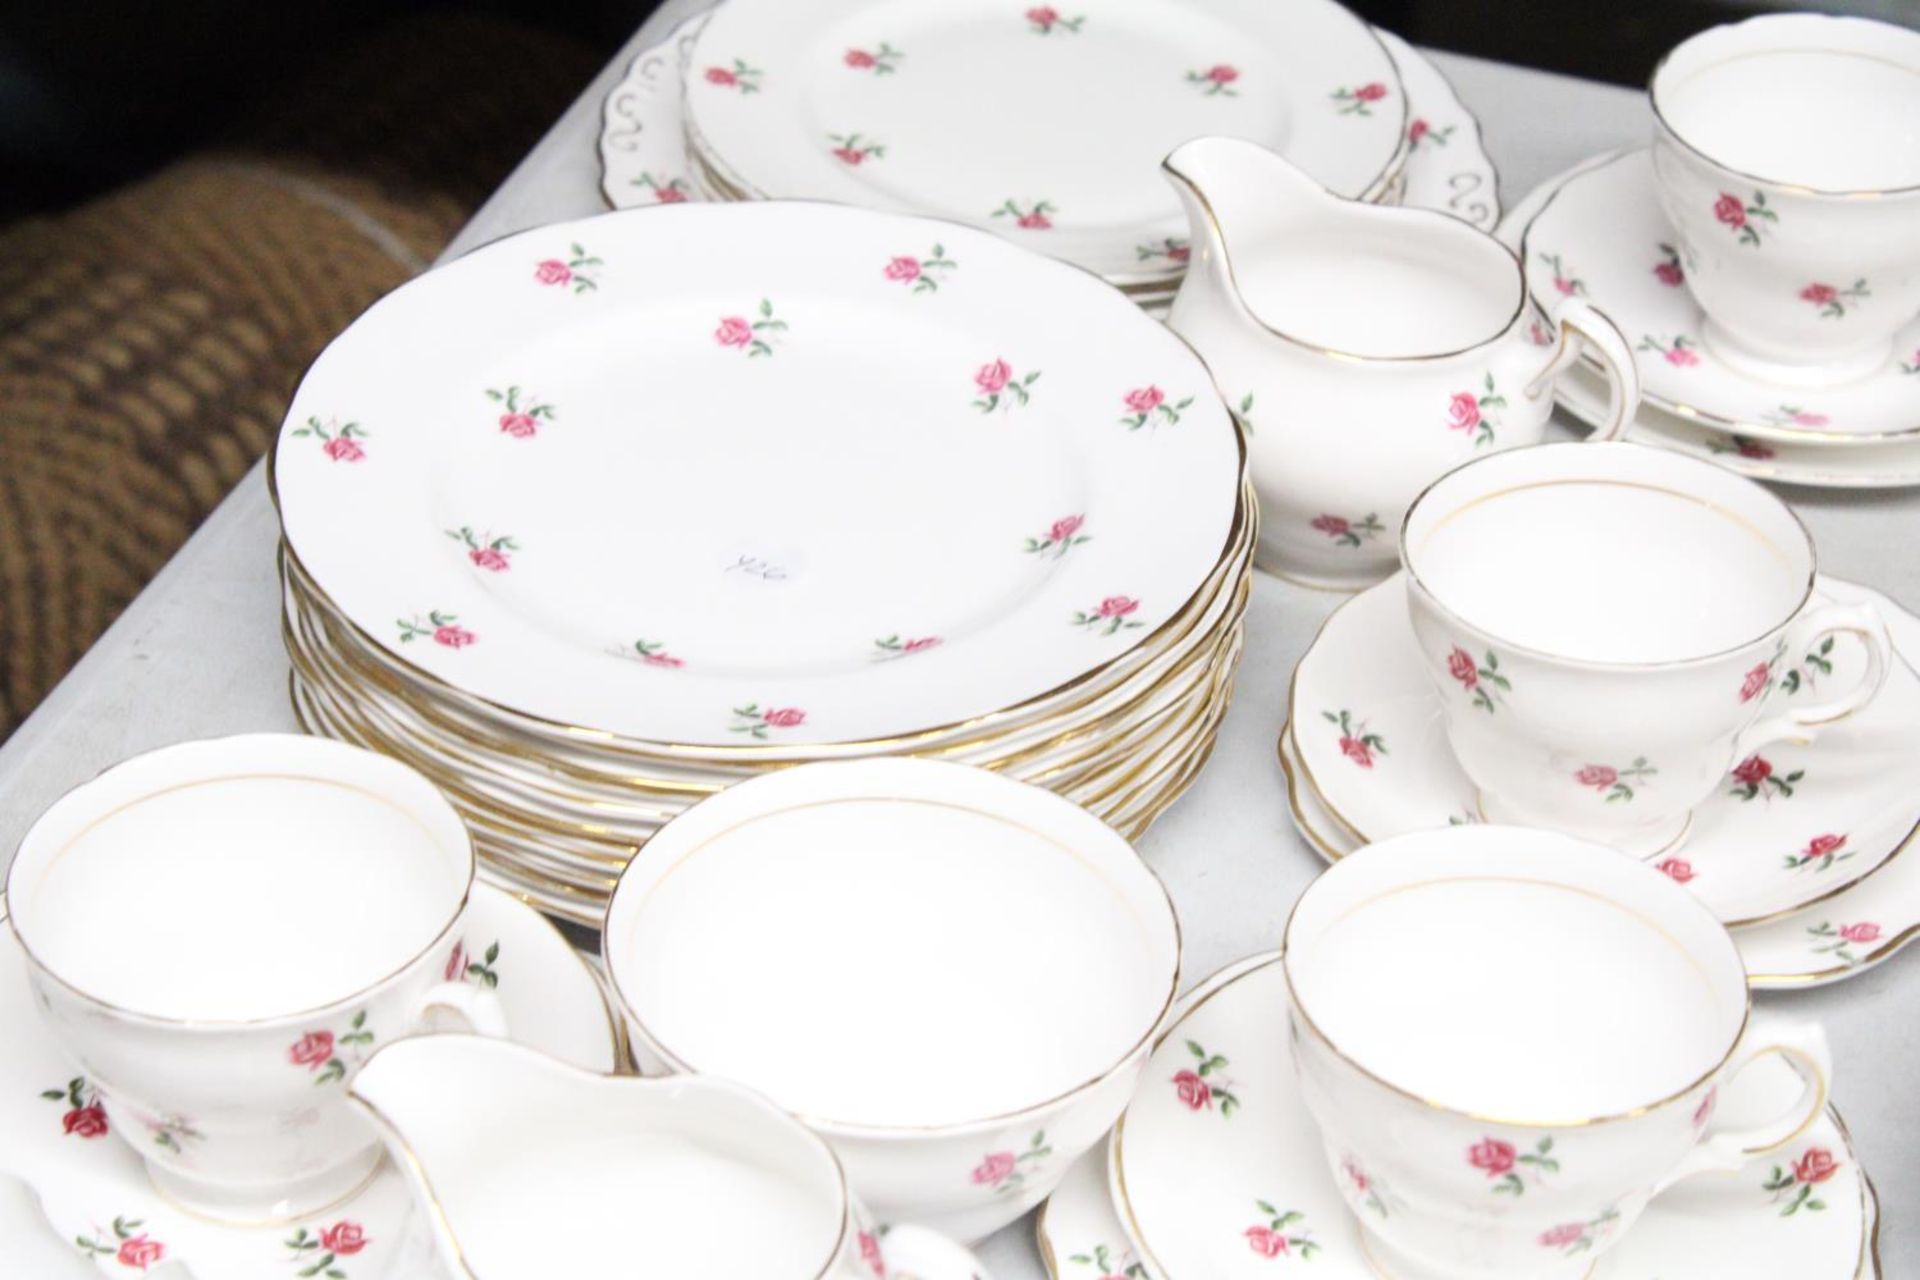 A VINTAGE COLCLOUGH CHINA TEASET, WITH ROSE PATTERN TO INCLUDE PLATES, CREAM JUGS, A SUGAR BOWL, - Image 2 of 5